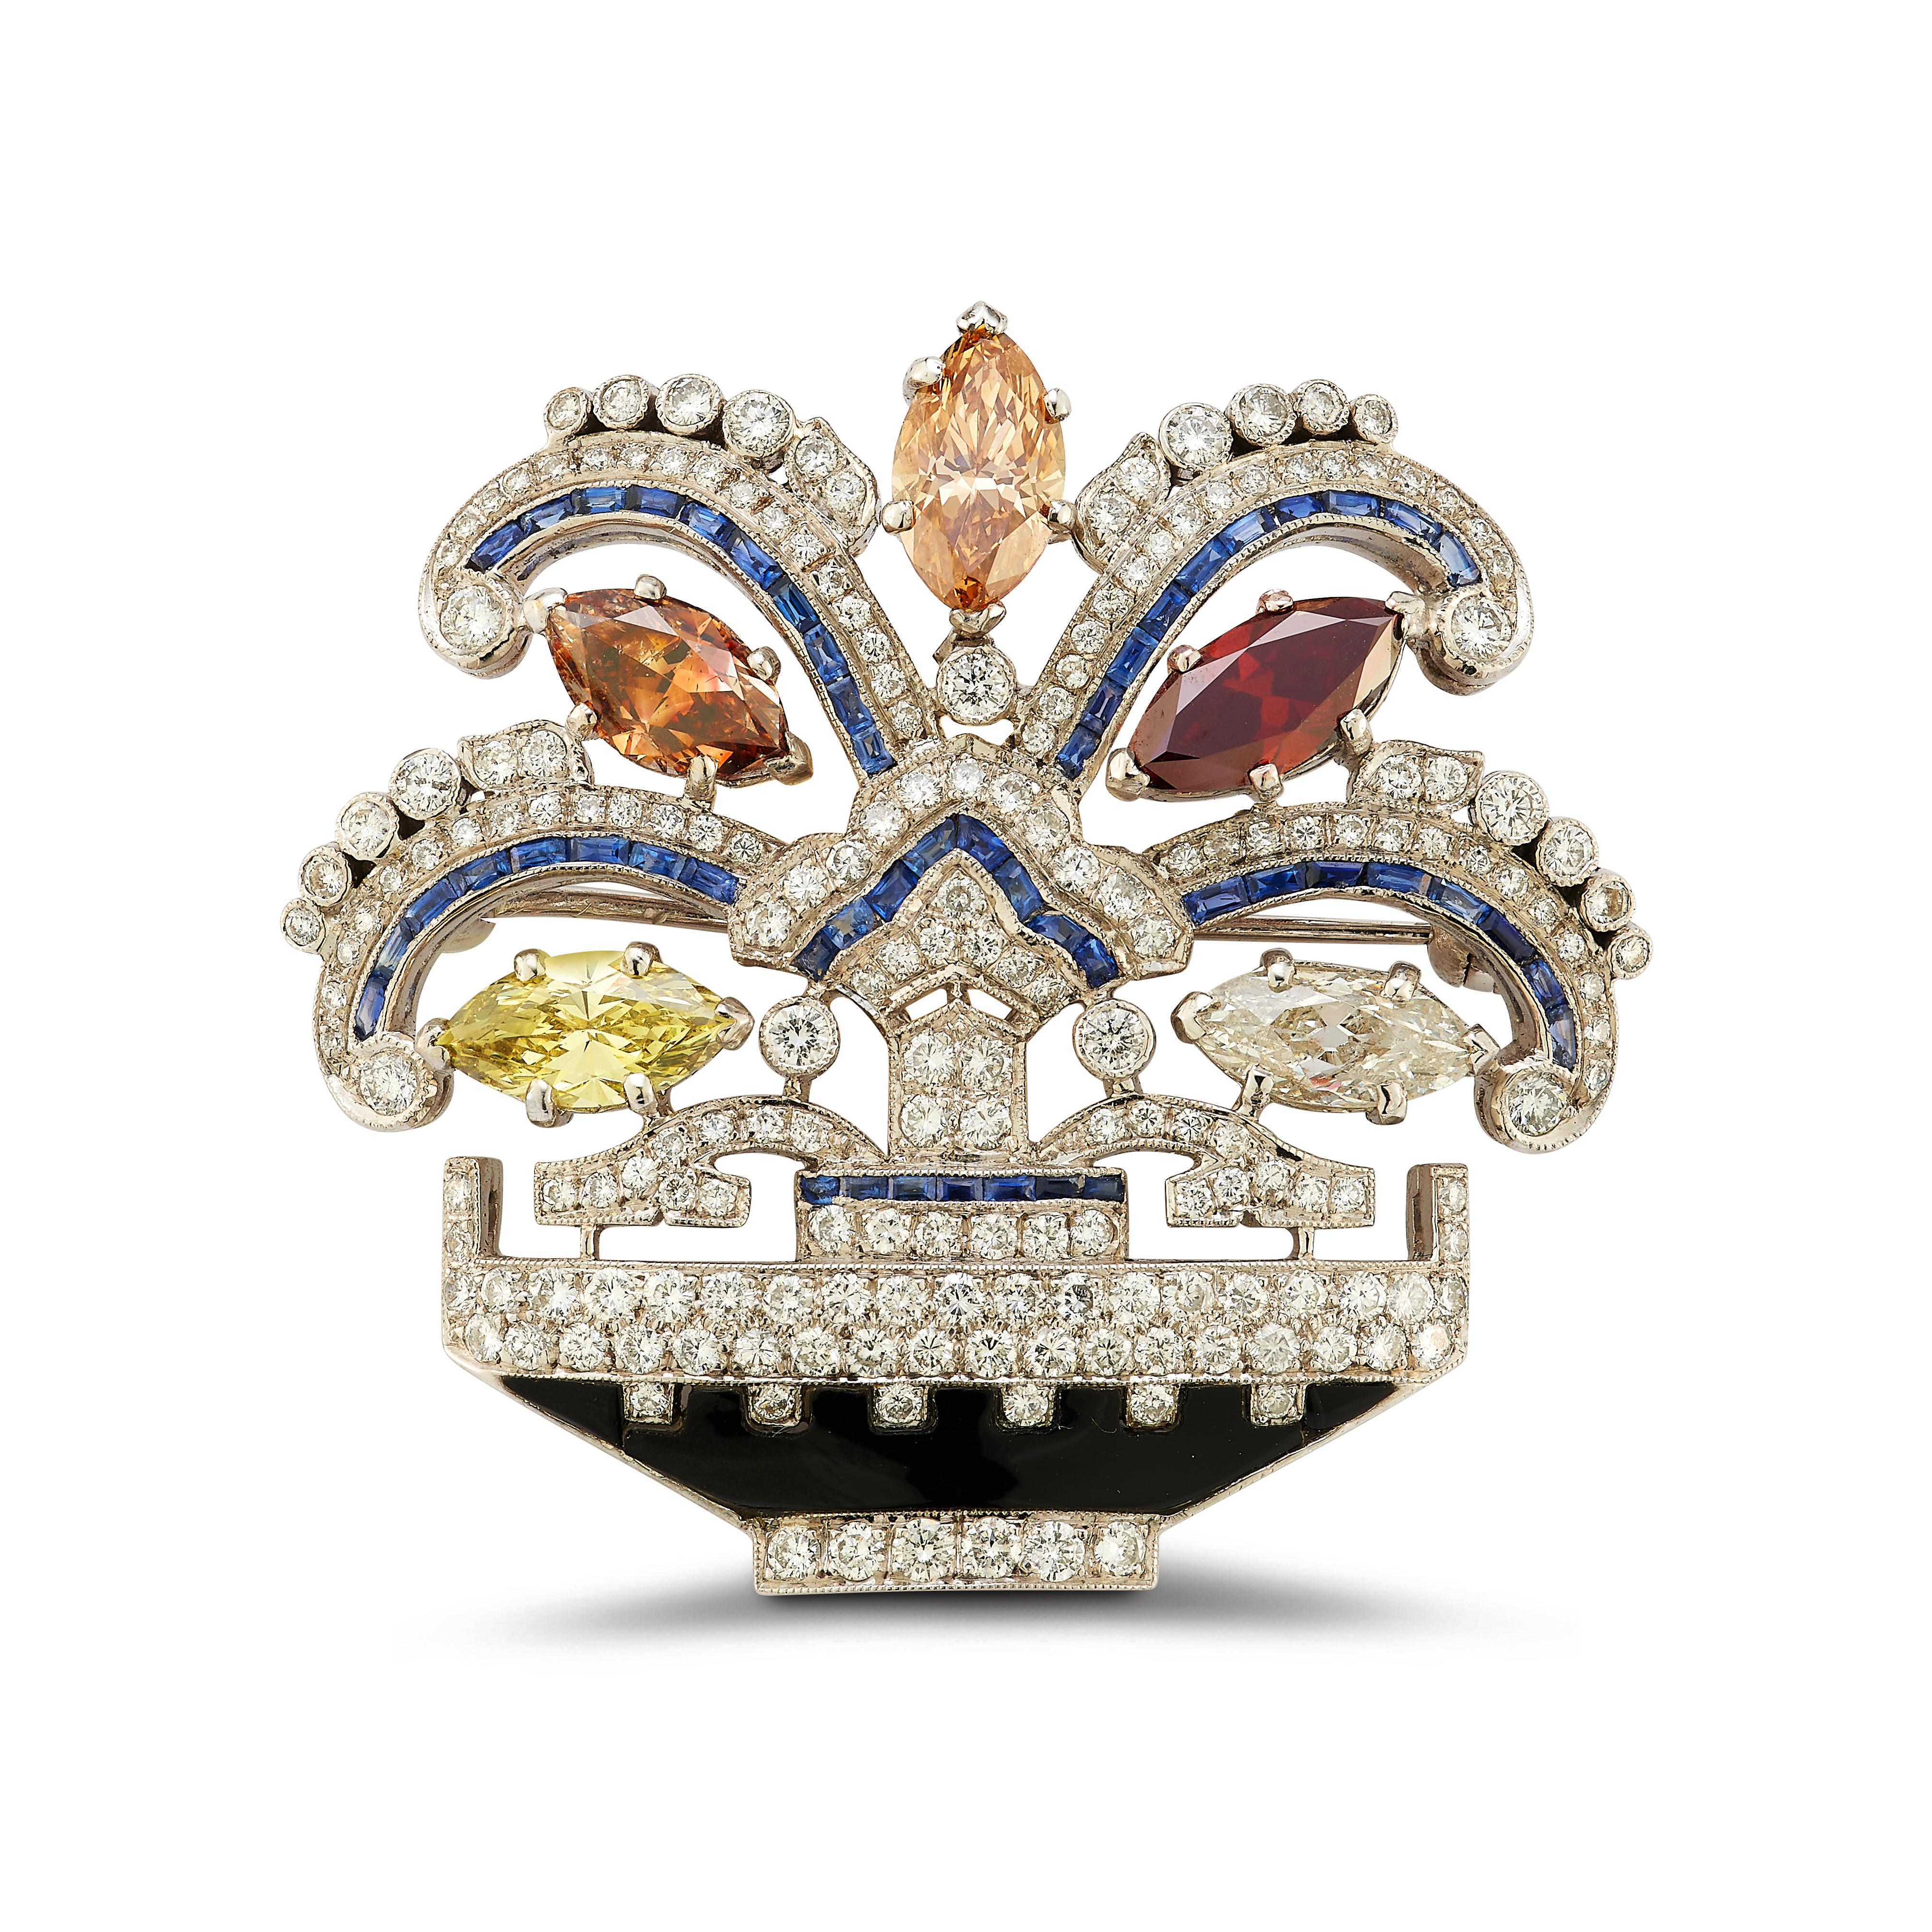 Certified Natural Multicolor Fancy Diamond Brooch

An 18 karat white gold brooch set with 5 multi color marquise cut diamonds each weighing approximately 1 carat, 182 round cut diamonds weighing approximately 3.64 carats, 51 baguette cut sapphires